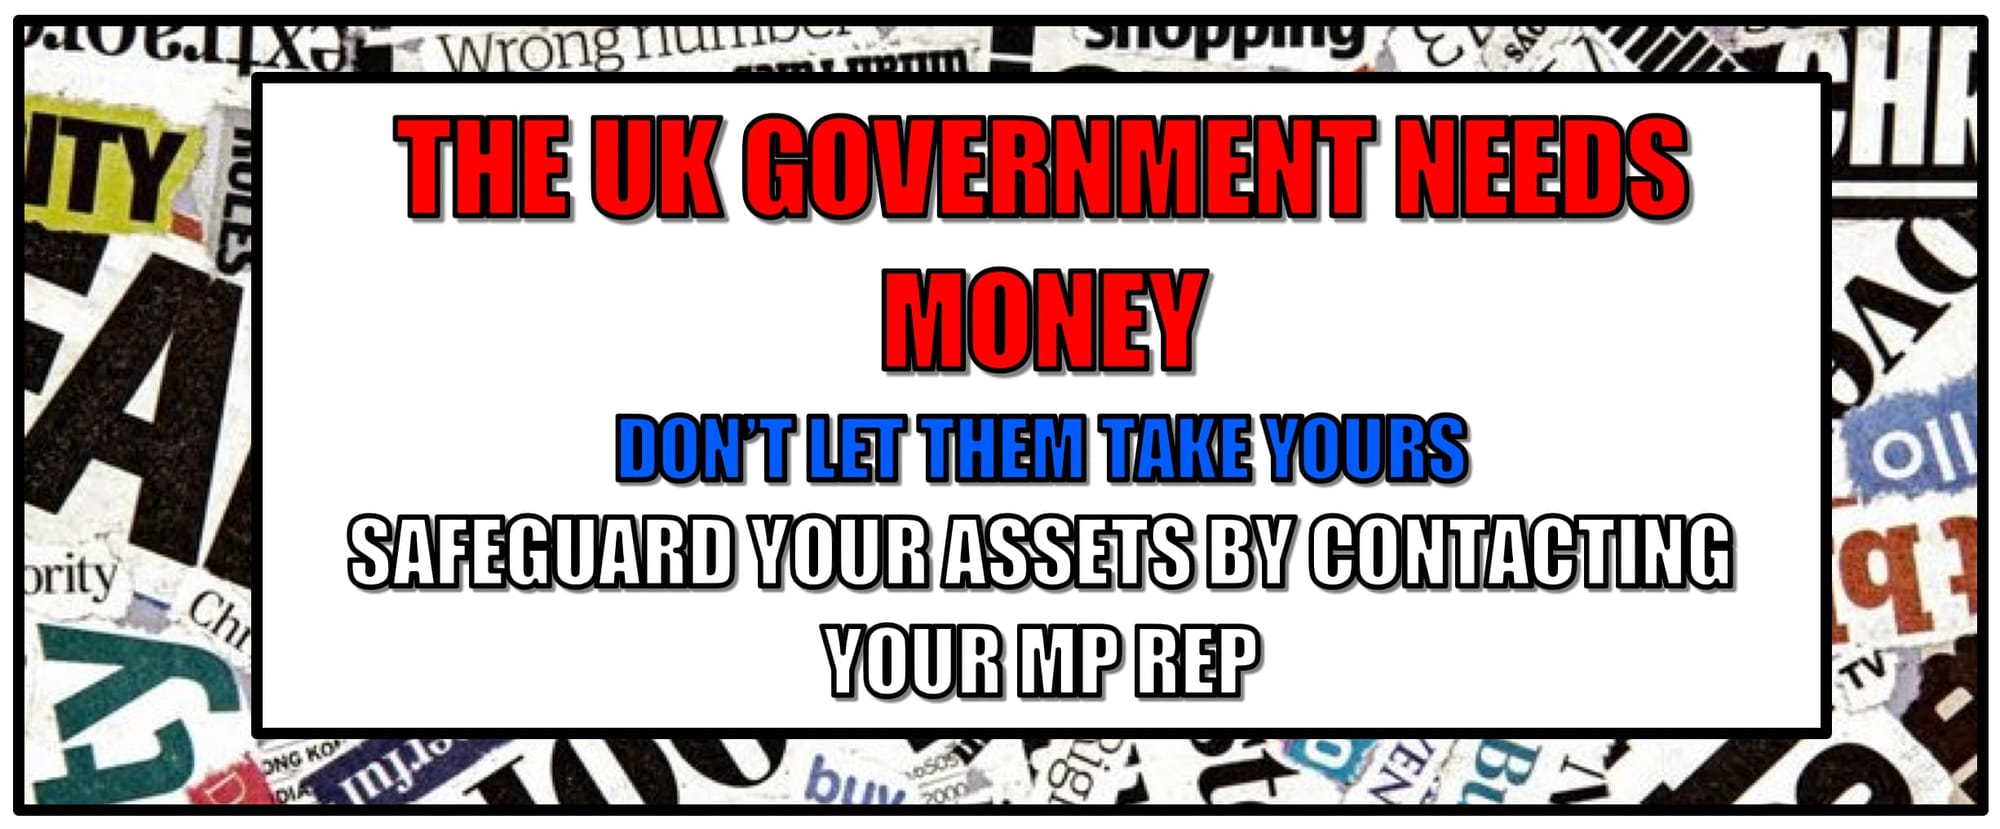 HEADER - THE UK GOVERNMENT NEEDS MONEY - DON'T LET THEM TAKE YOURS